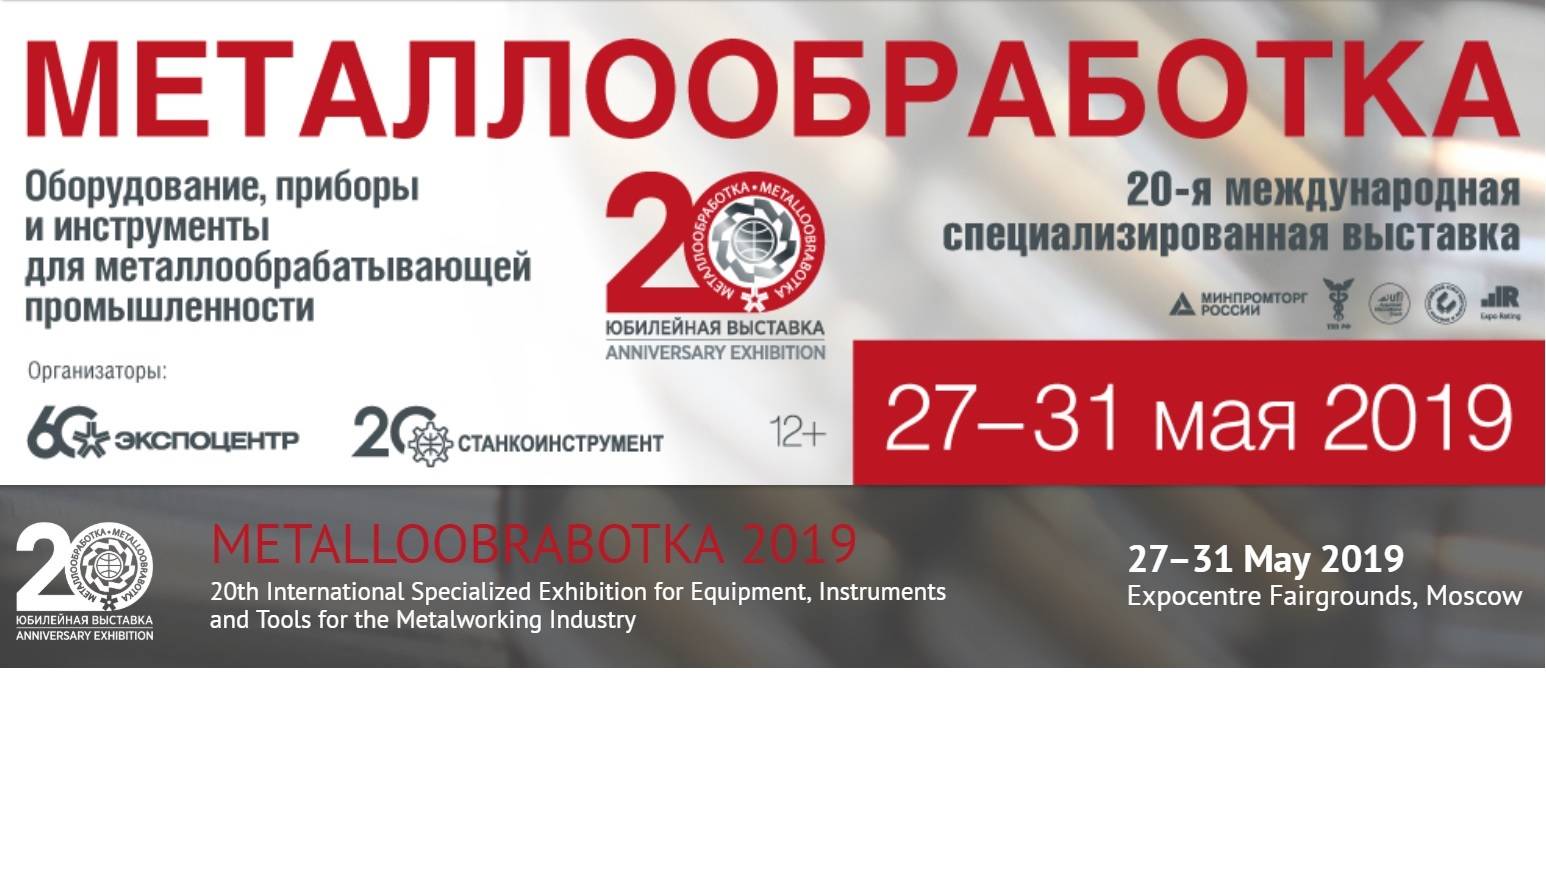 Metalloobrabotka 2019 in Moscow